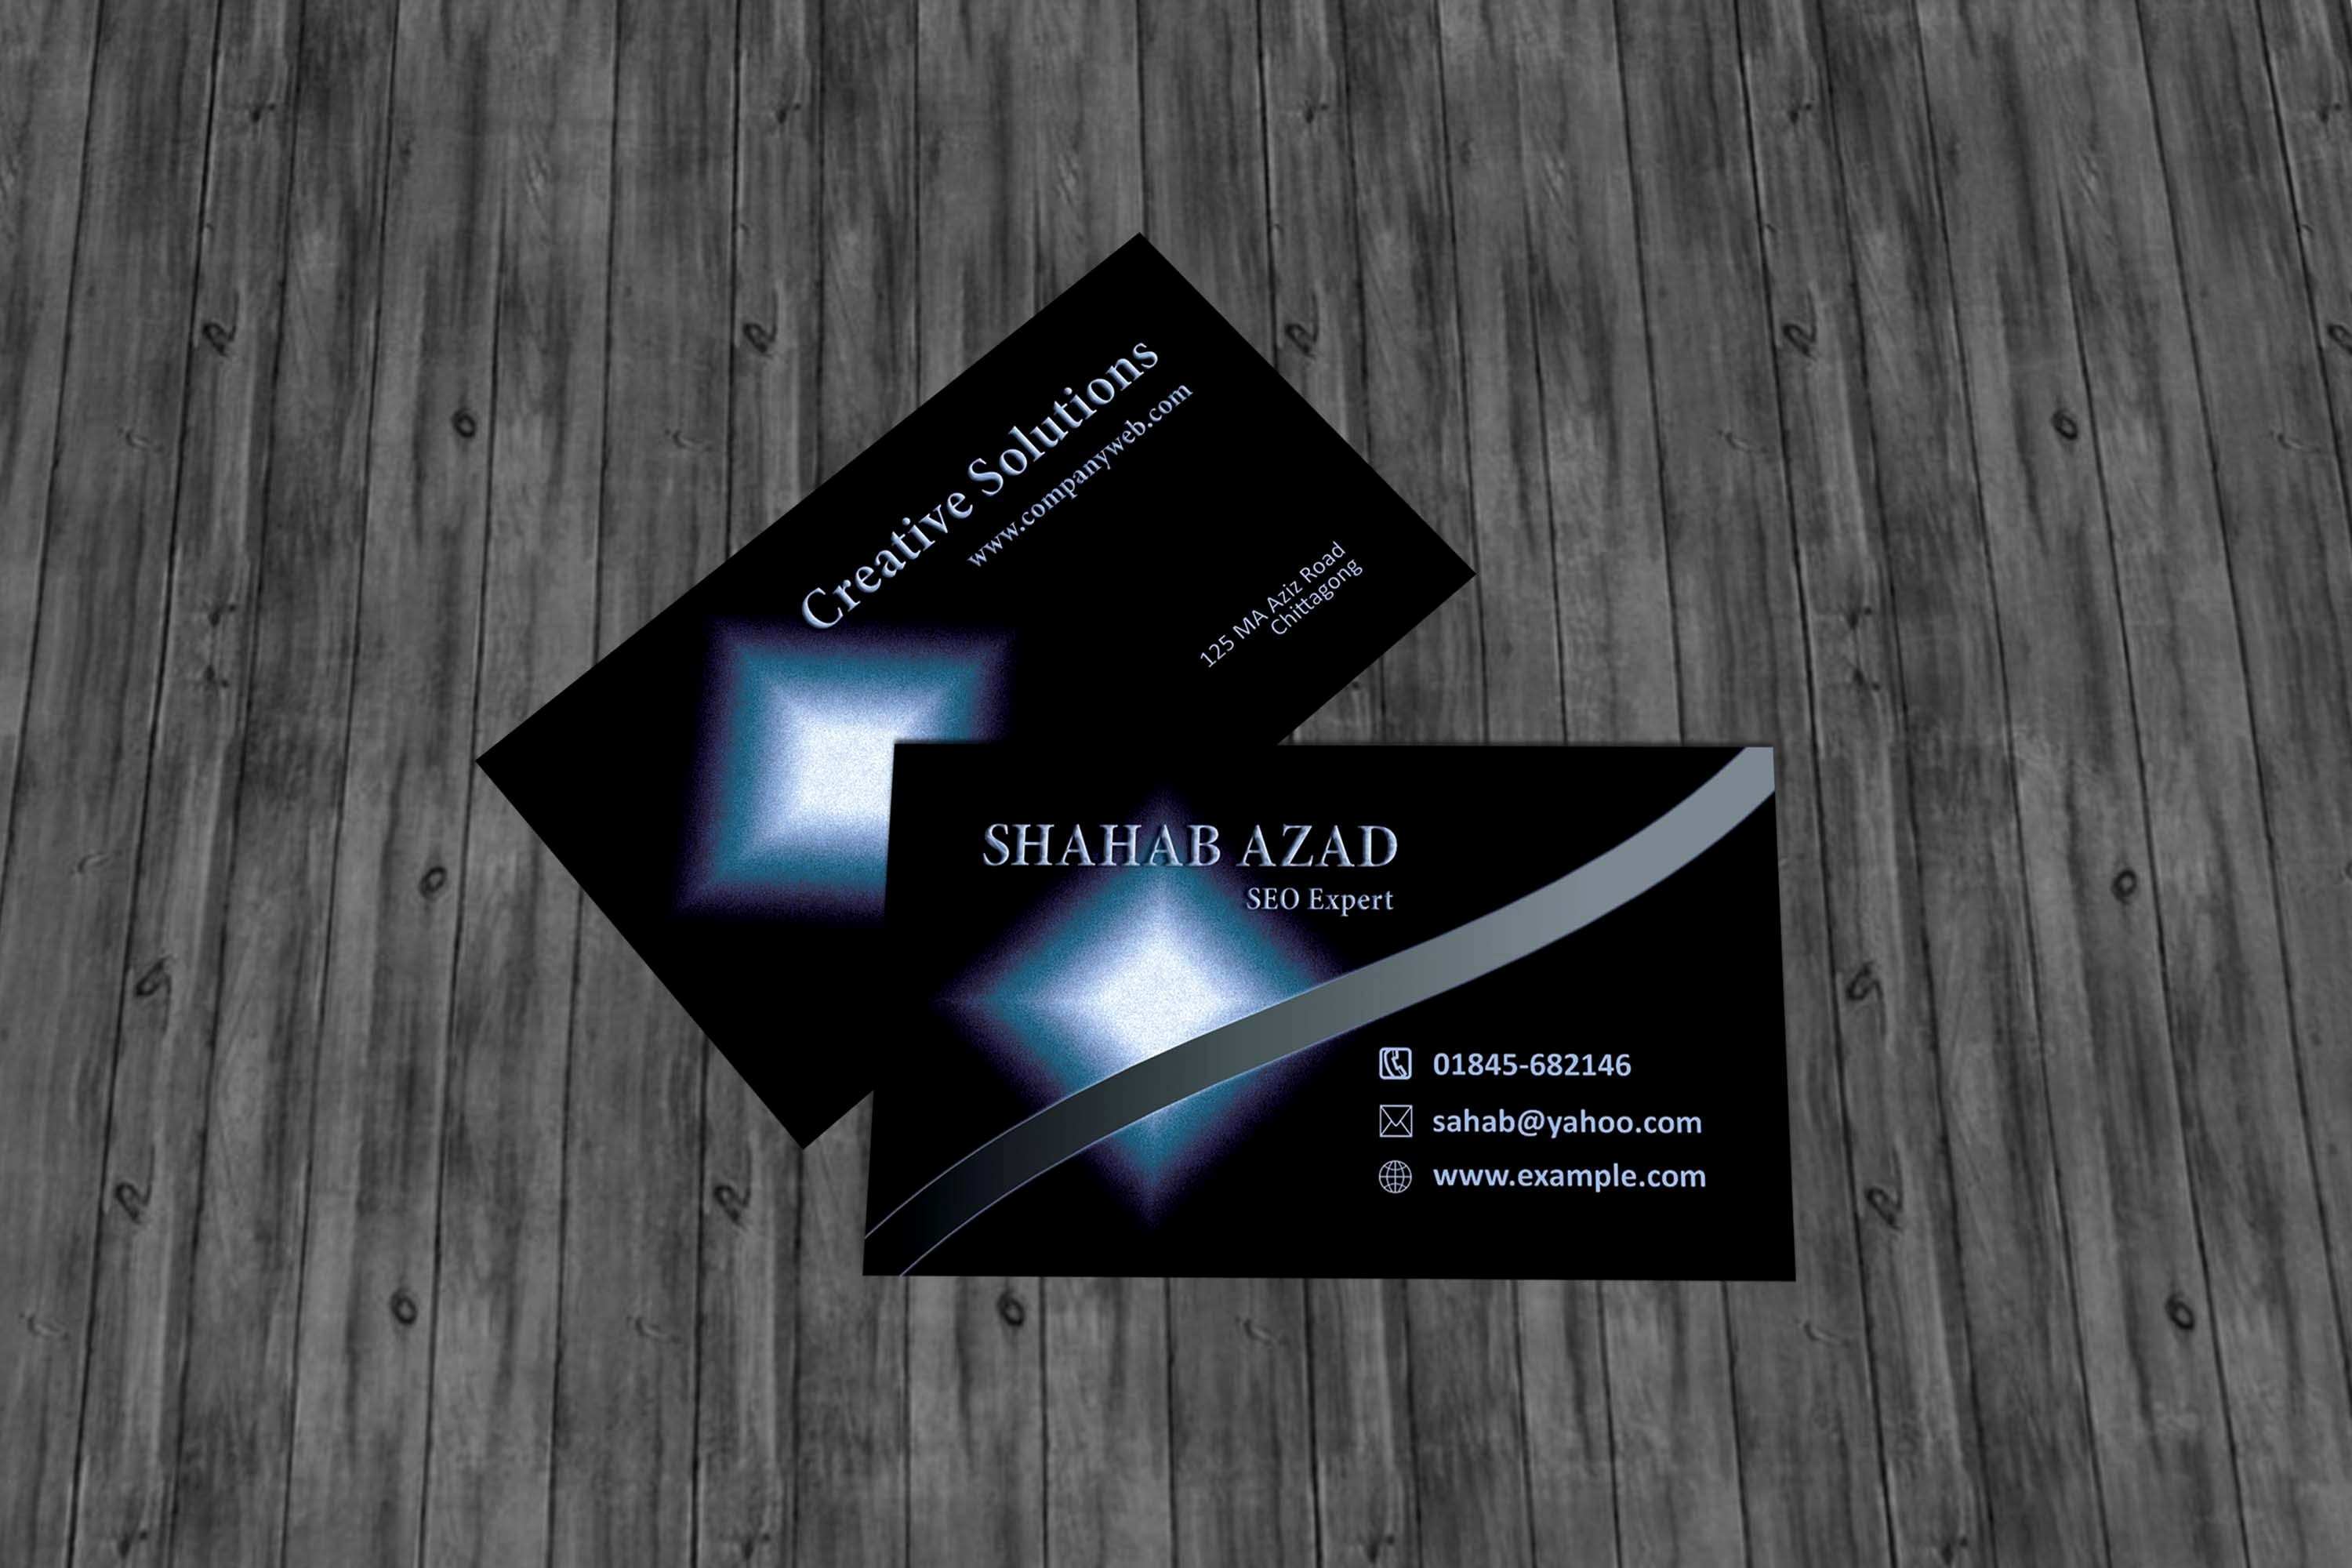 23 Adding Photoshop Cs6 Business Card Template Download Photo by Photoshop Cs6 Business Card Template Download